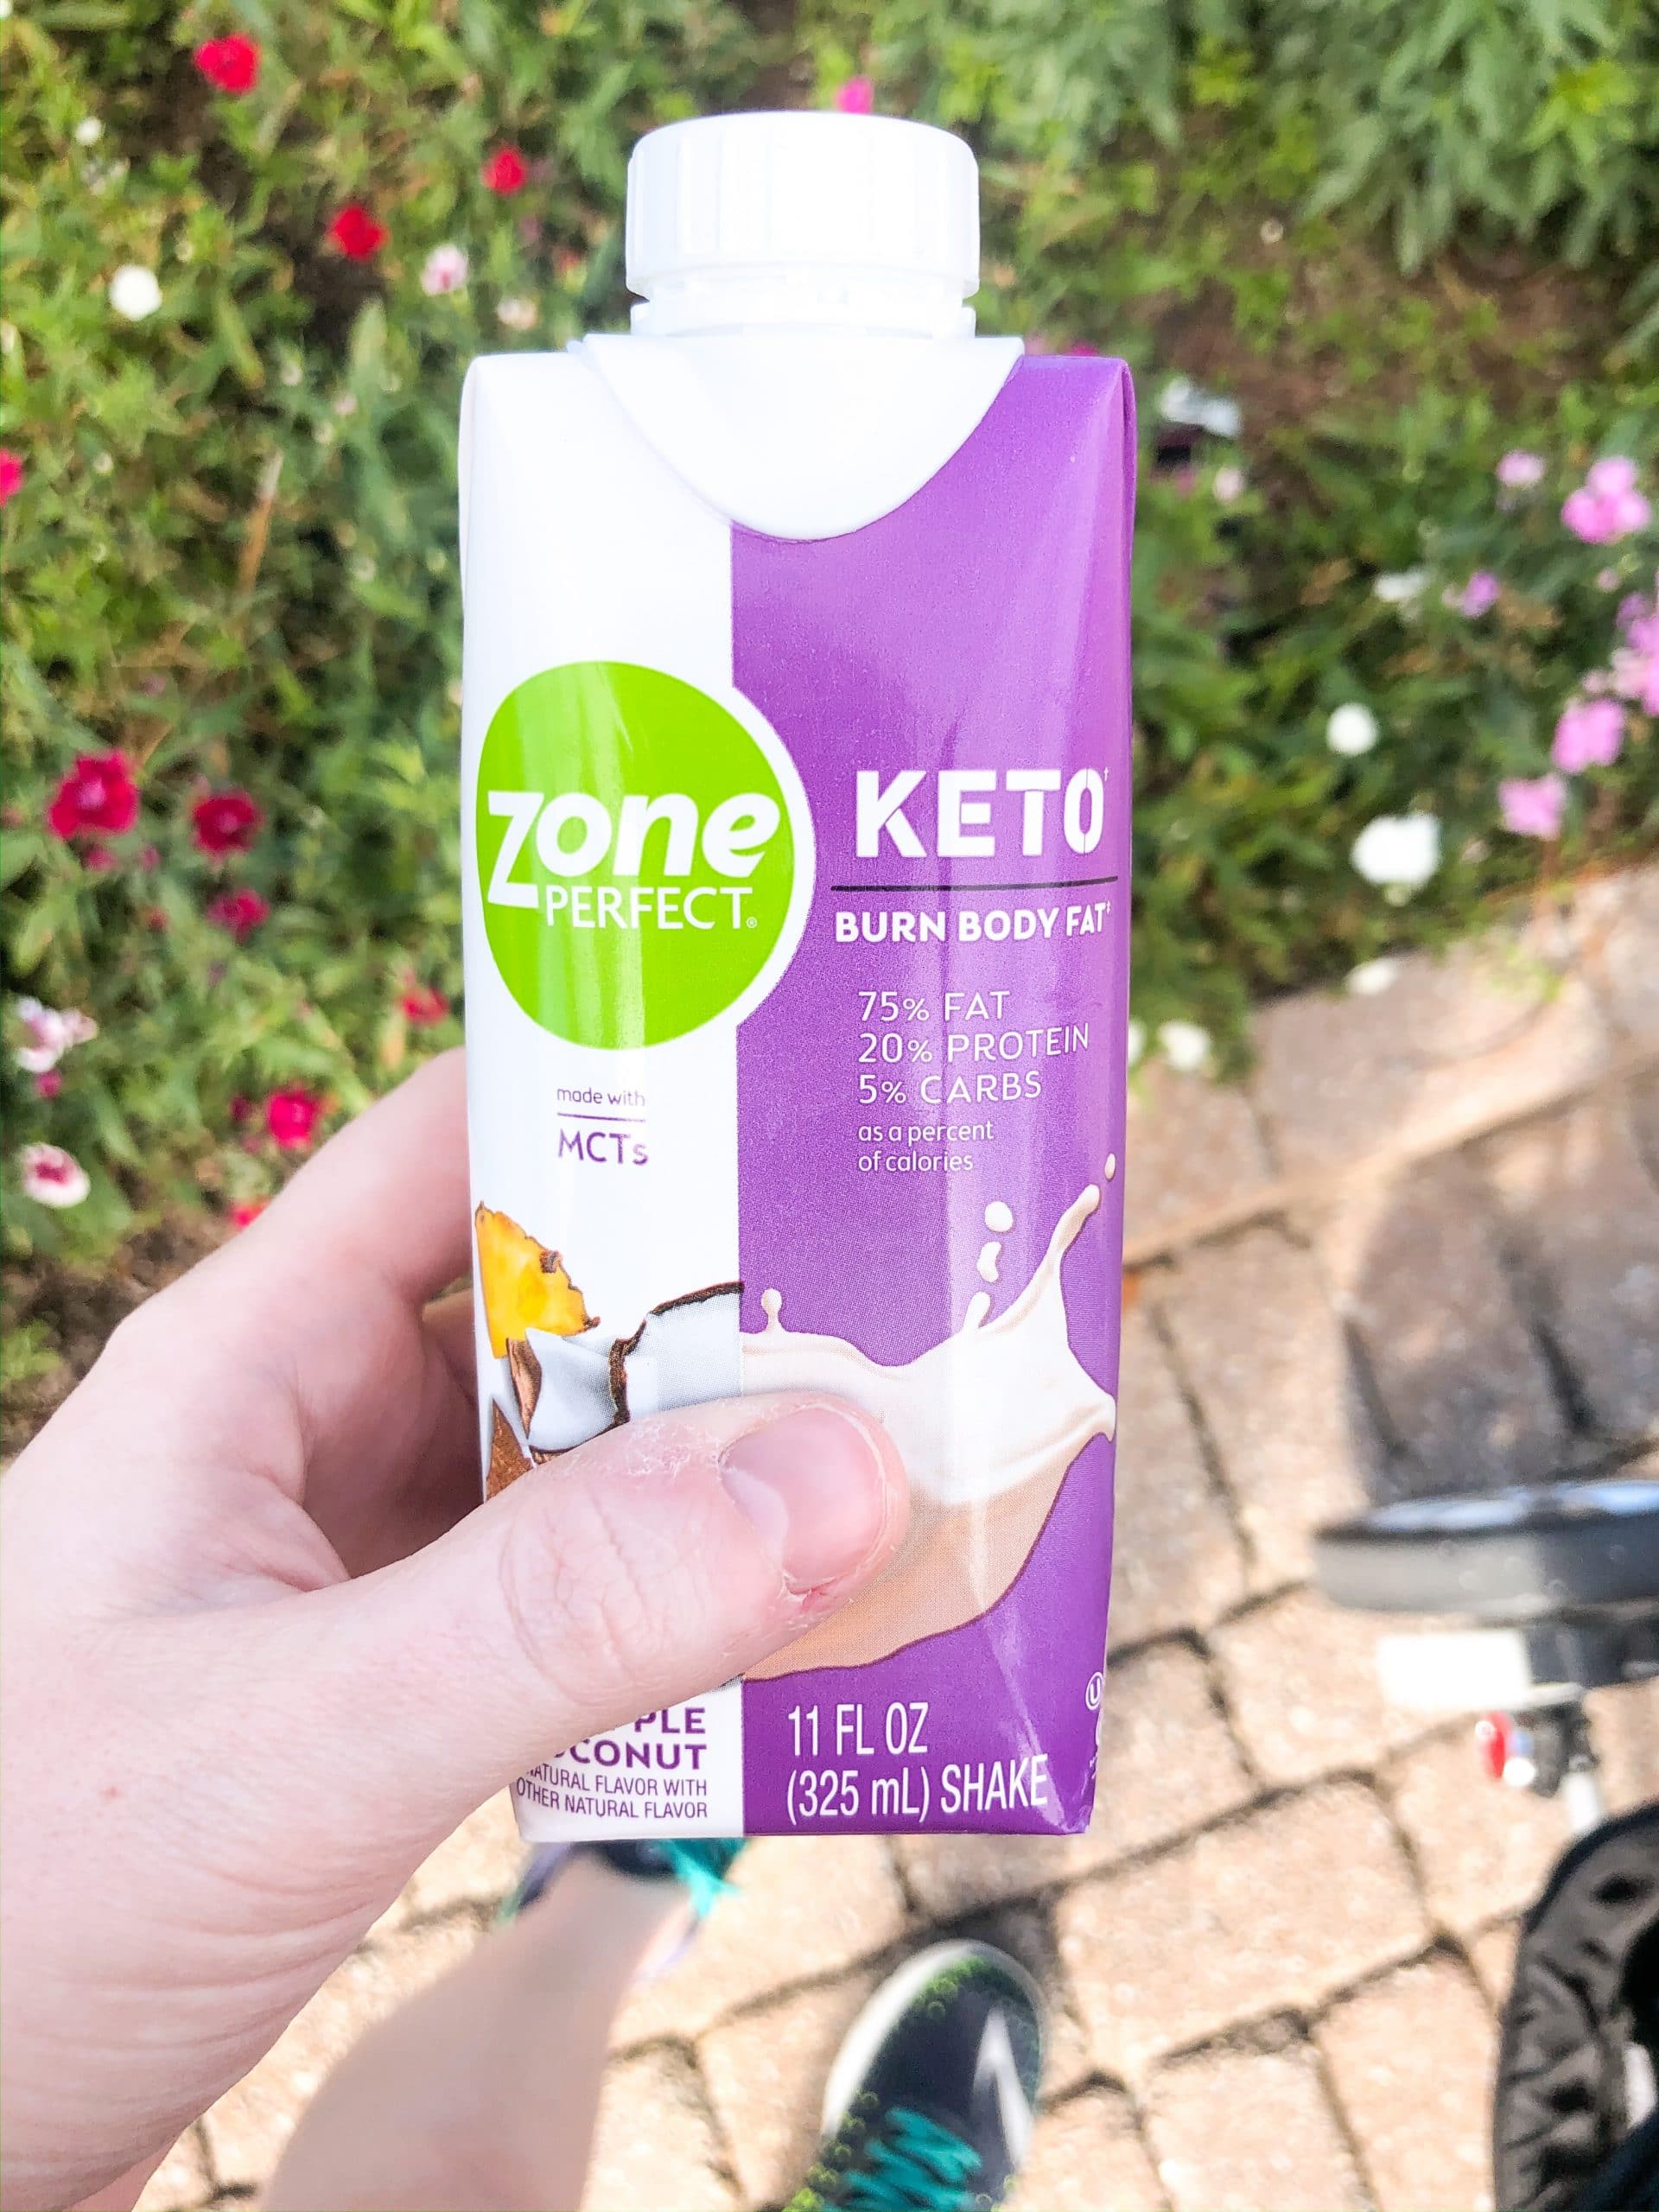 ZonePerfect Keto Shakes Fitness Outside